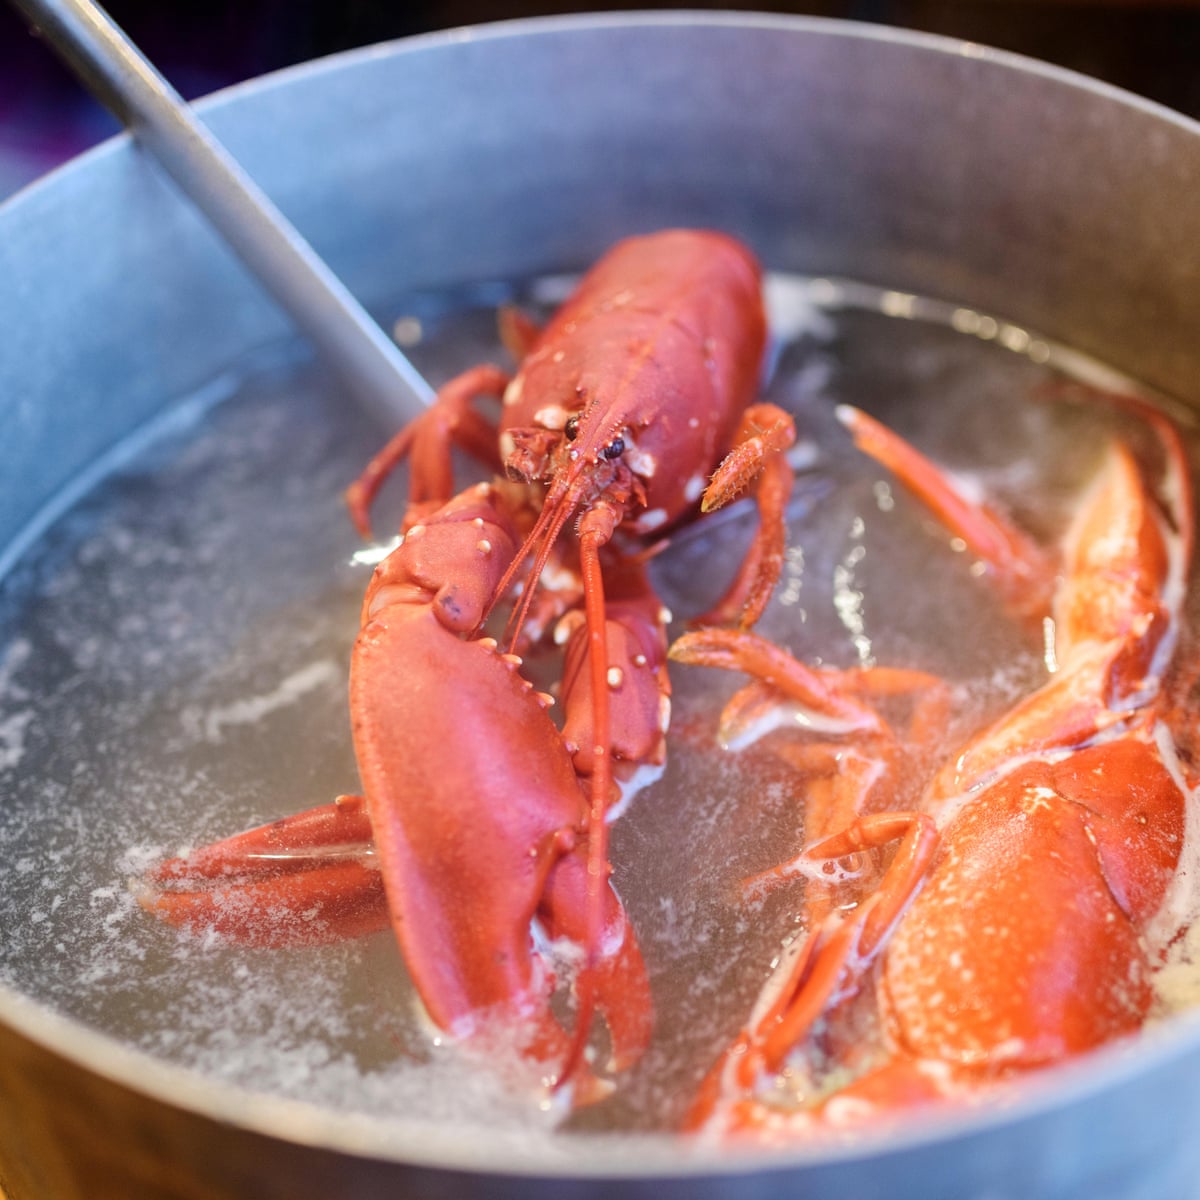 II. The Benefits of Boiling Lobster